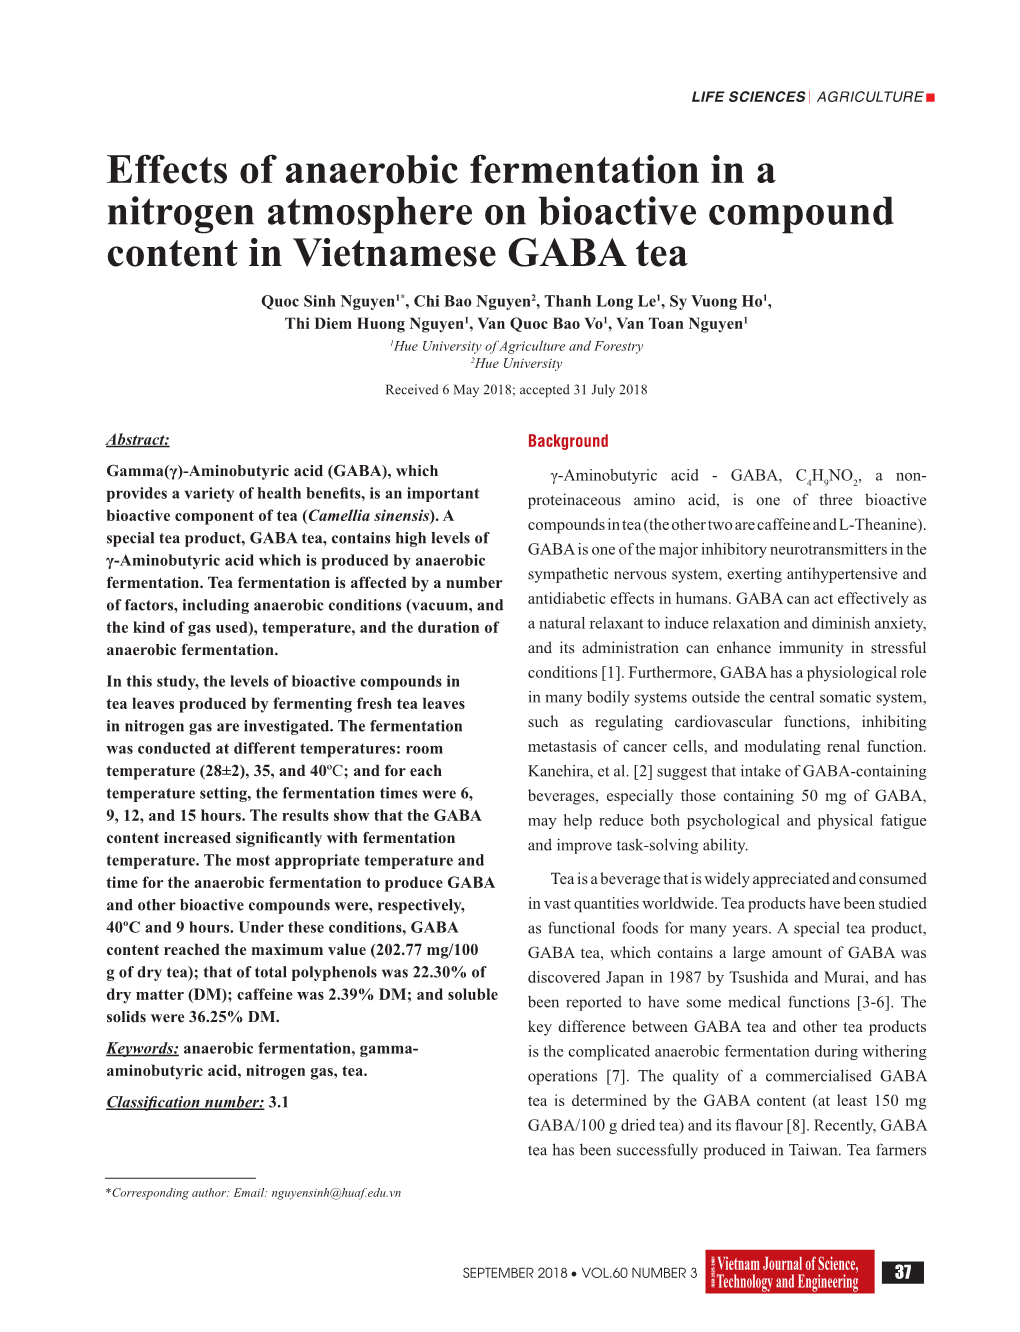 Effects of Anaerobic Fermentation in a Nitrogen Atmosphere on Bioactive